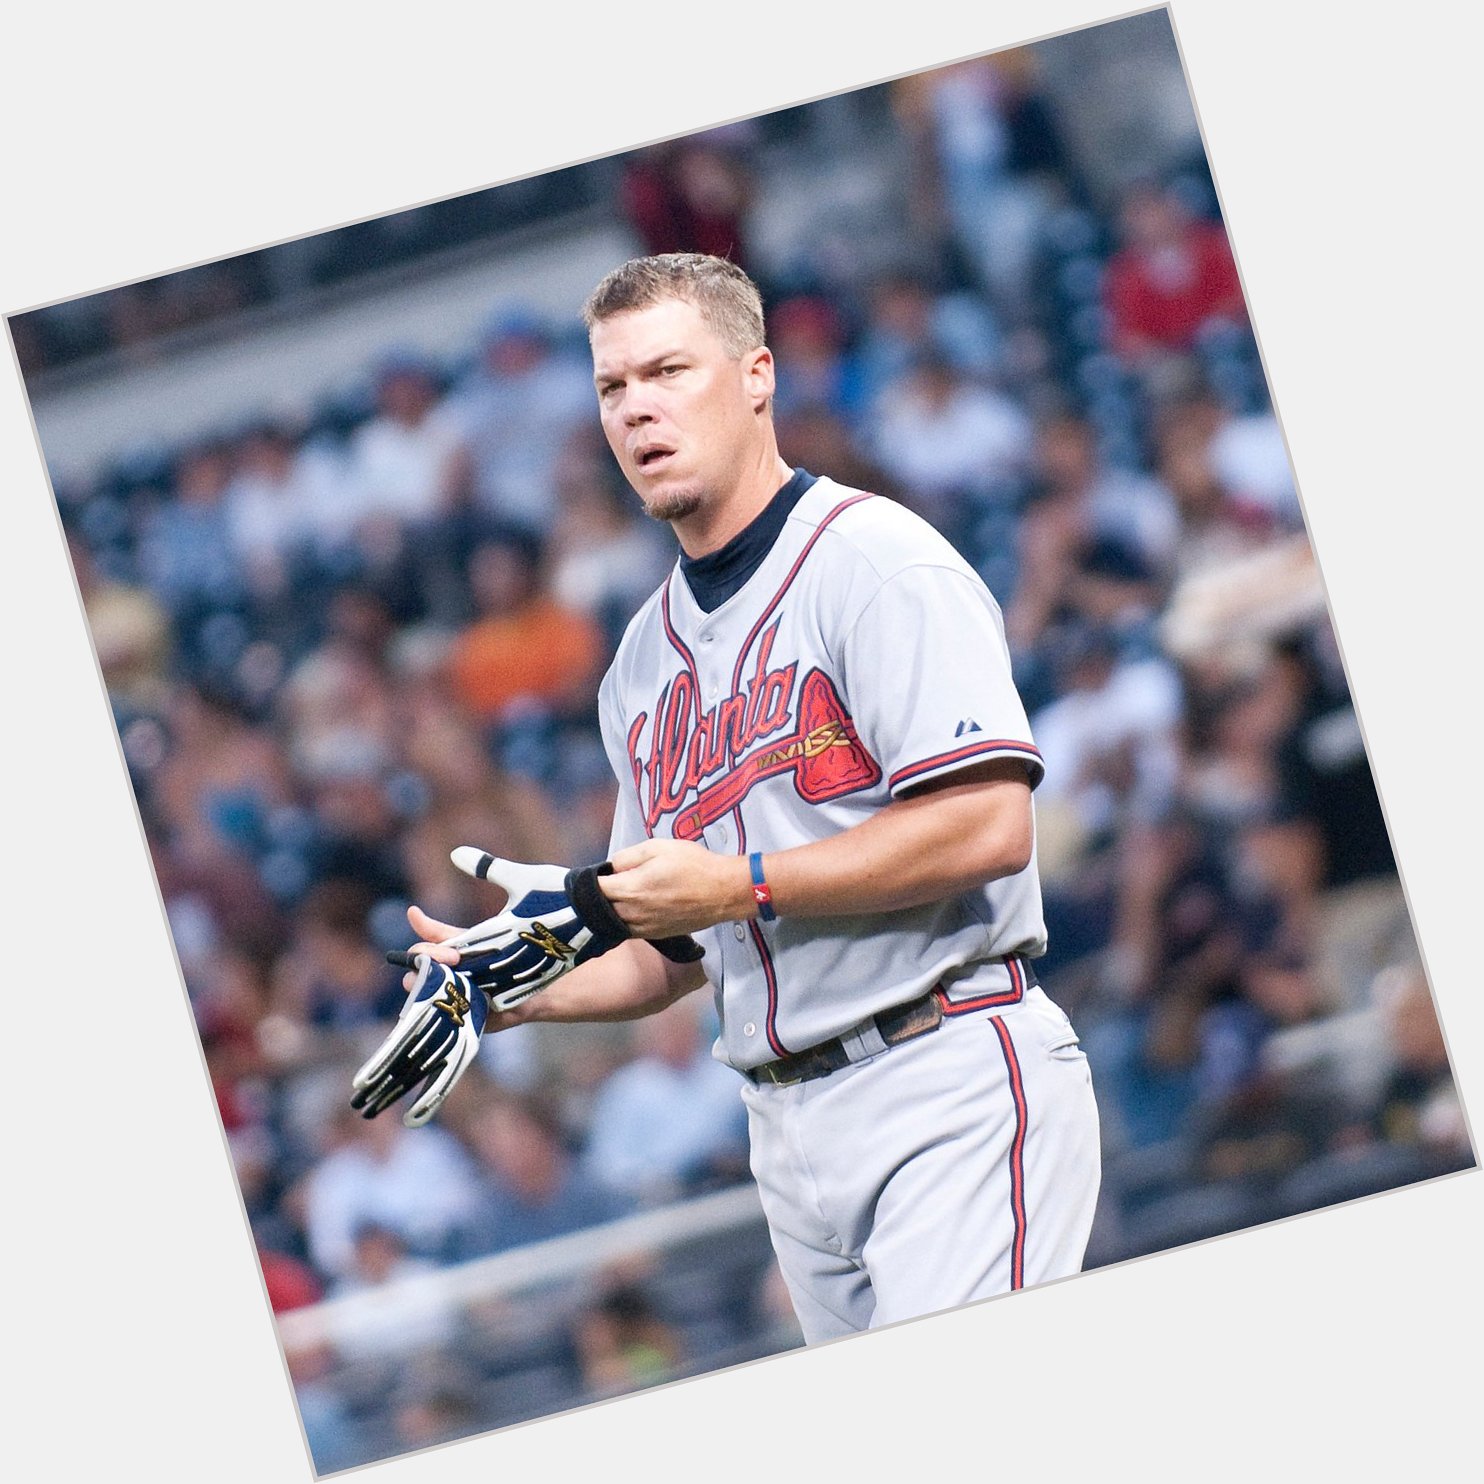 Happy birthday to the legend Chipper Jones, today he turned 47 years old. 